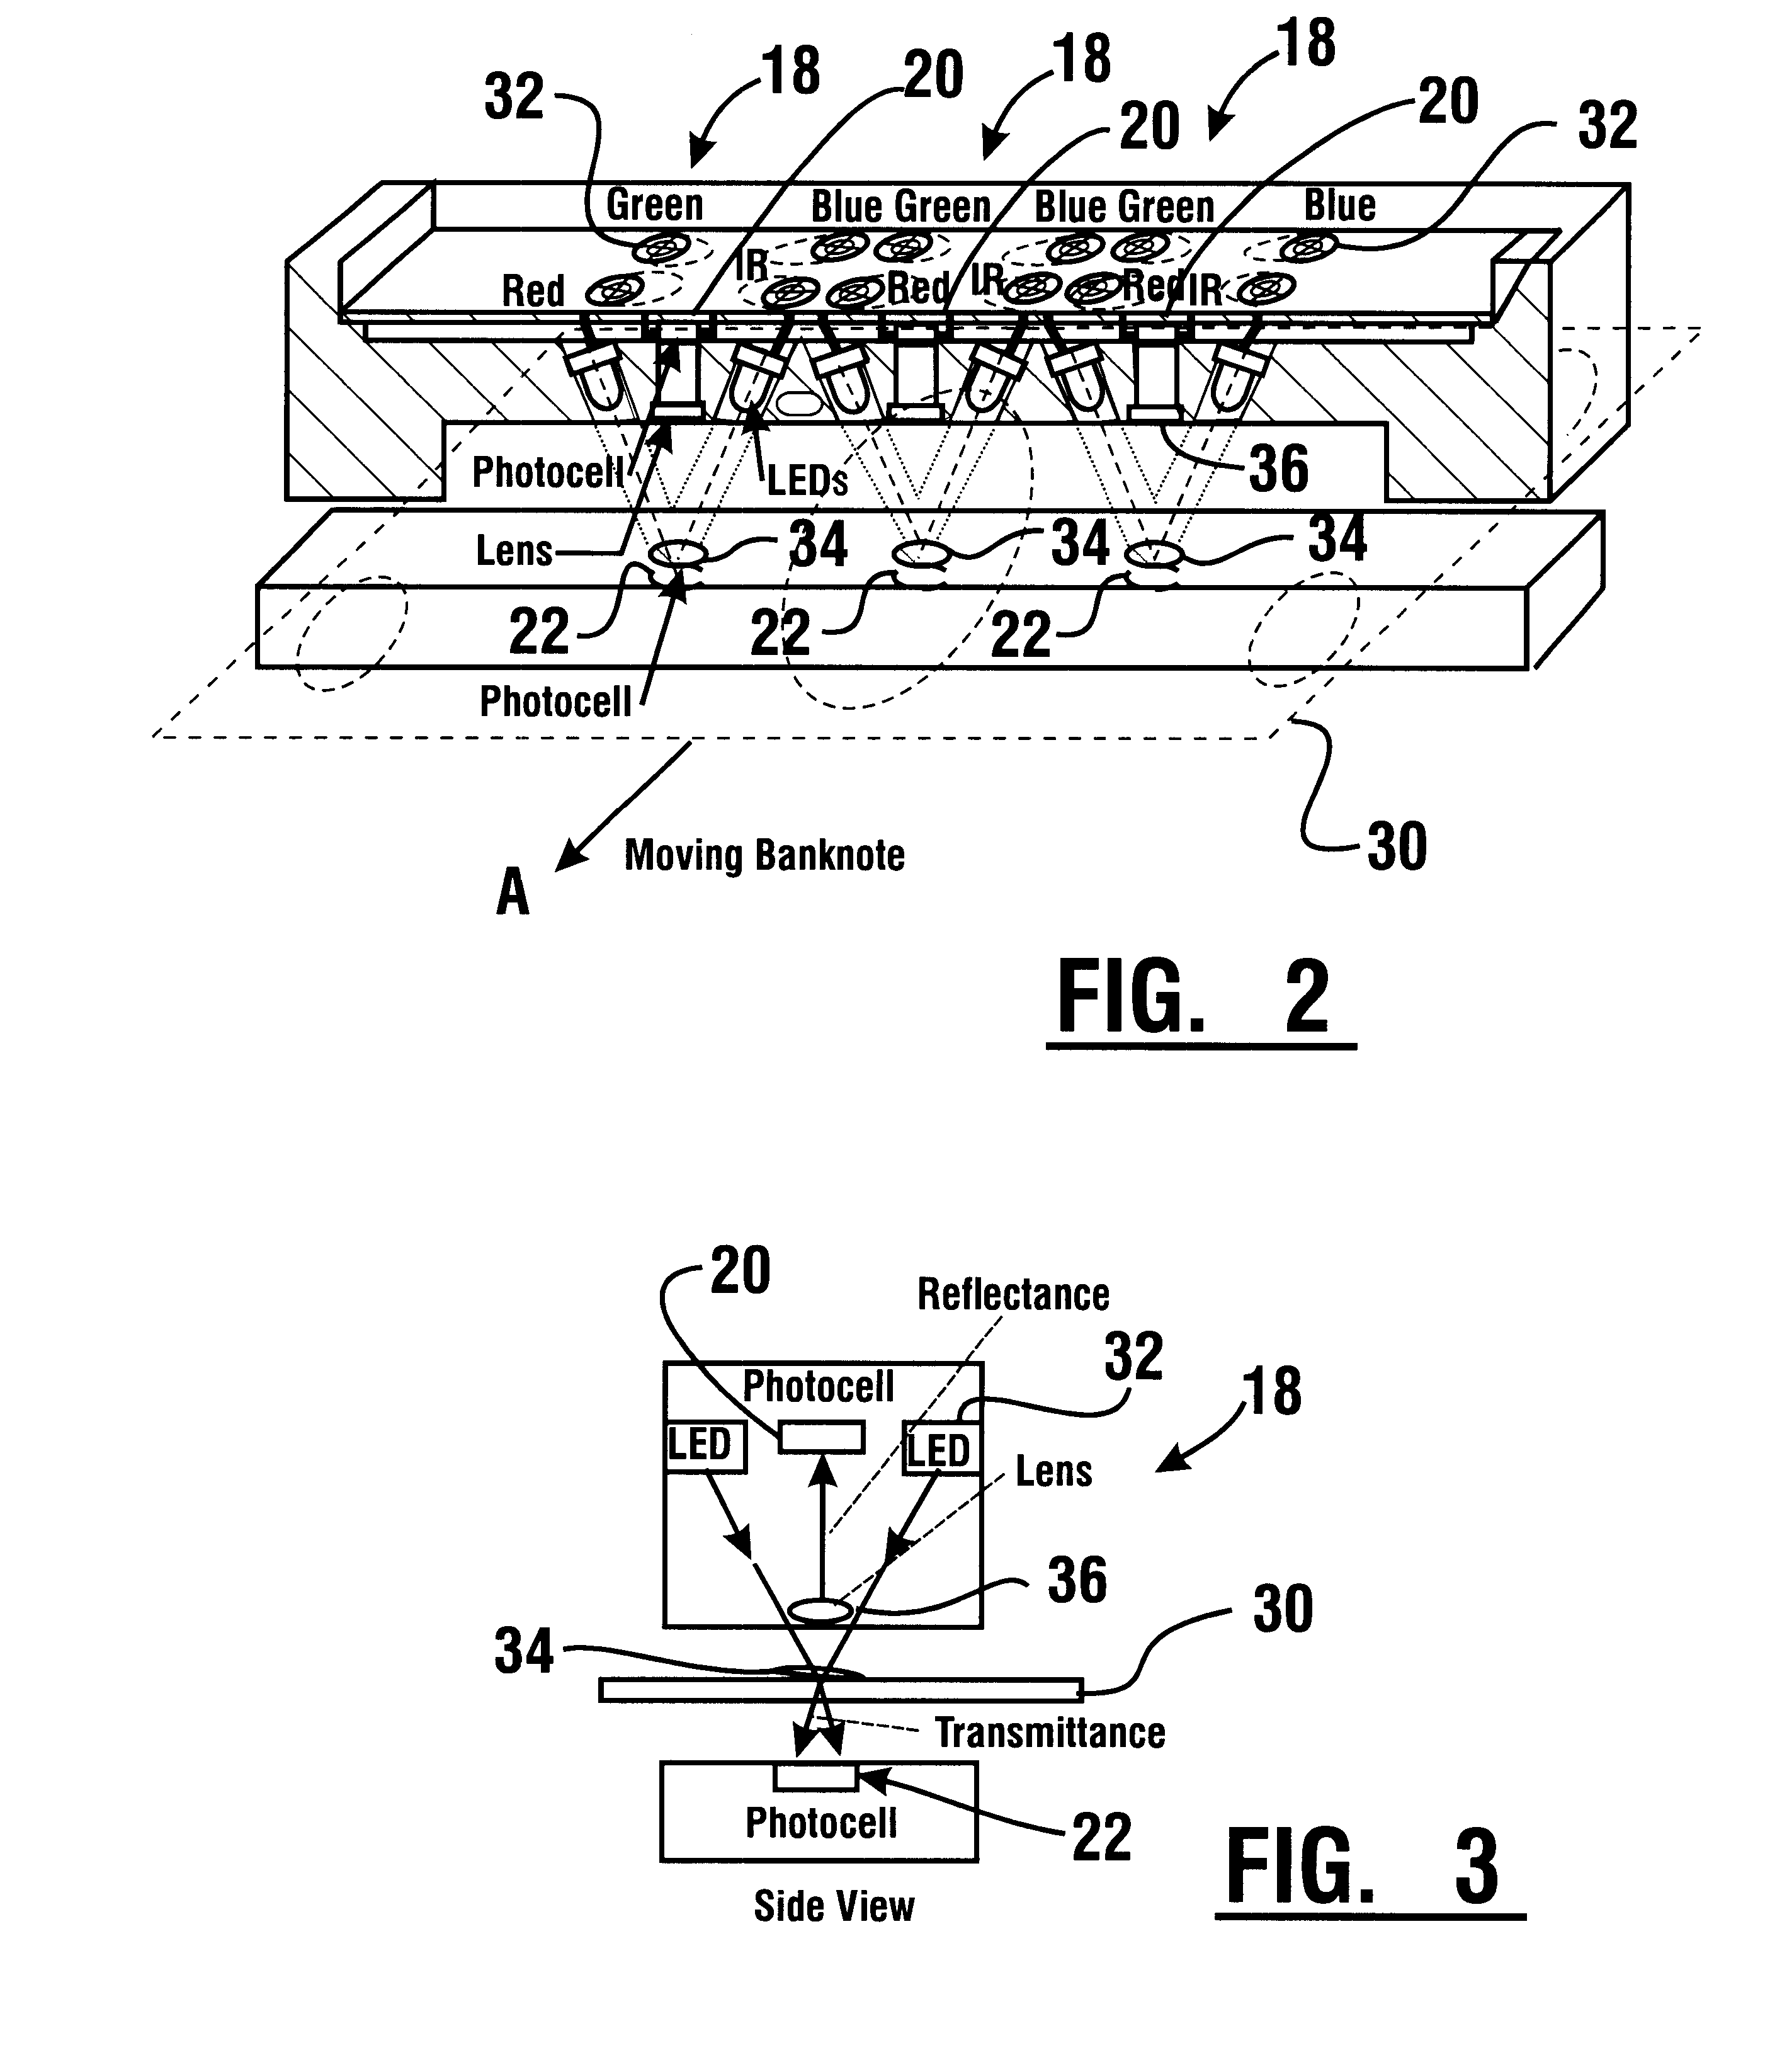 Apparatus and method for processing bank notes and other documents in an automated banking machine